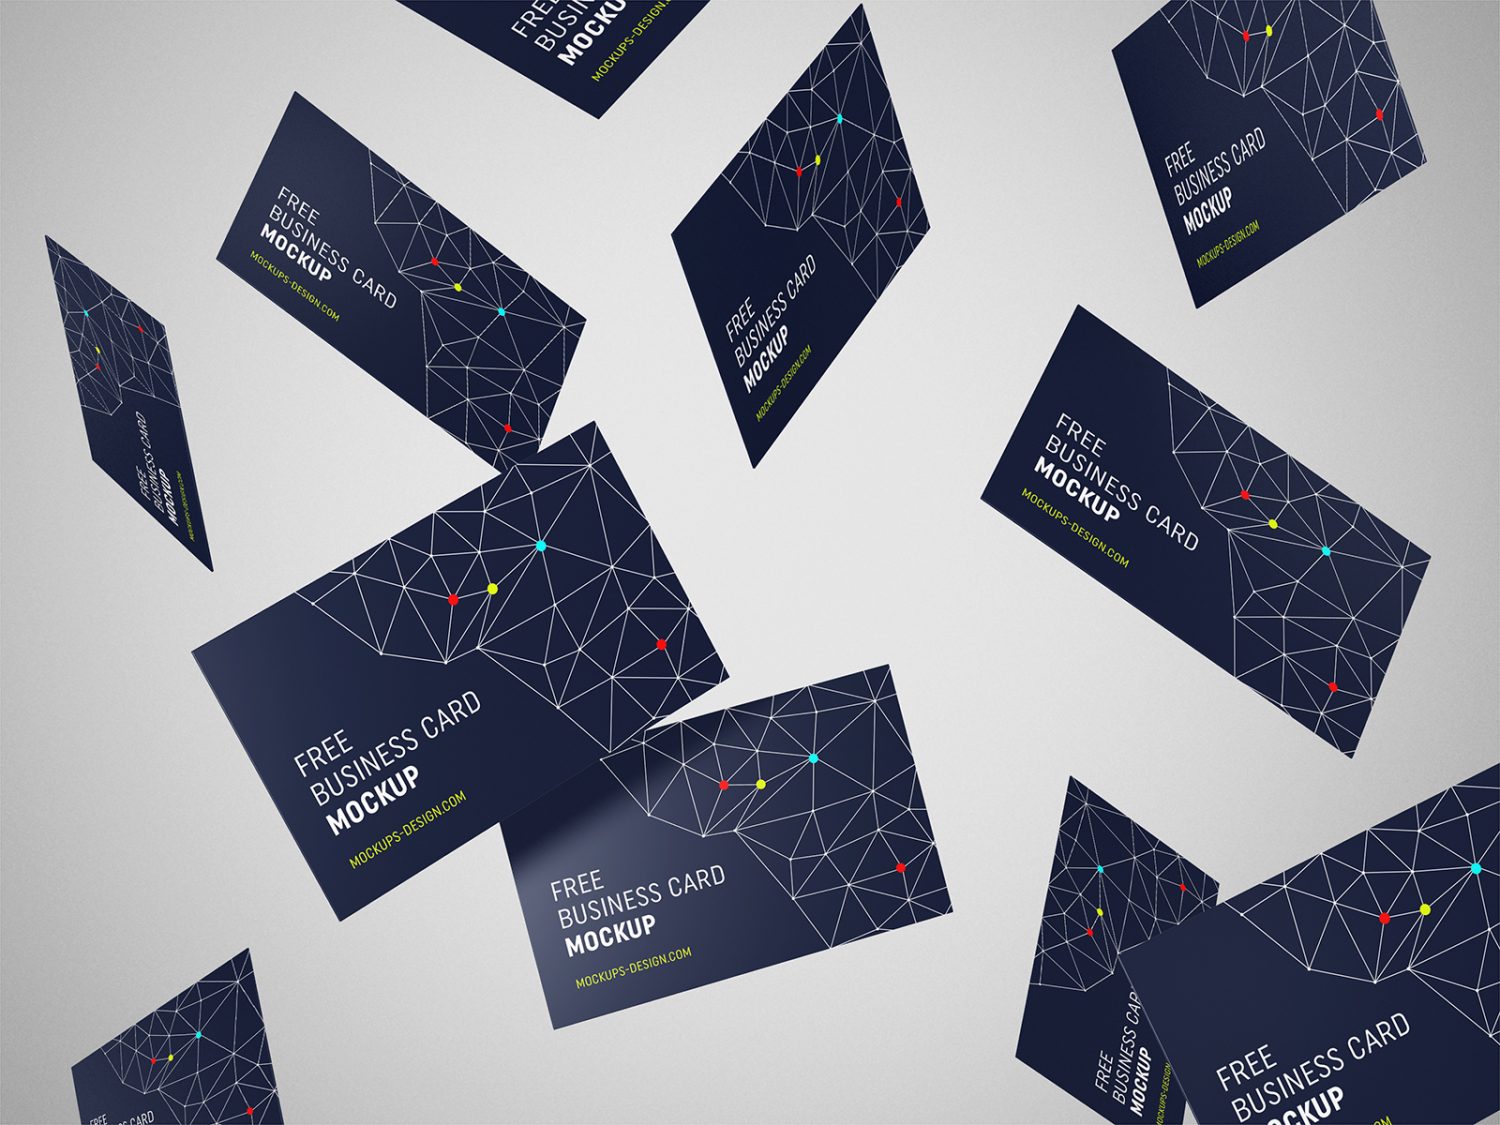 Download Free Falling Business Cards Mockup Psfiles